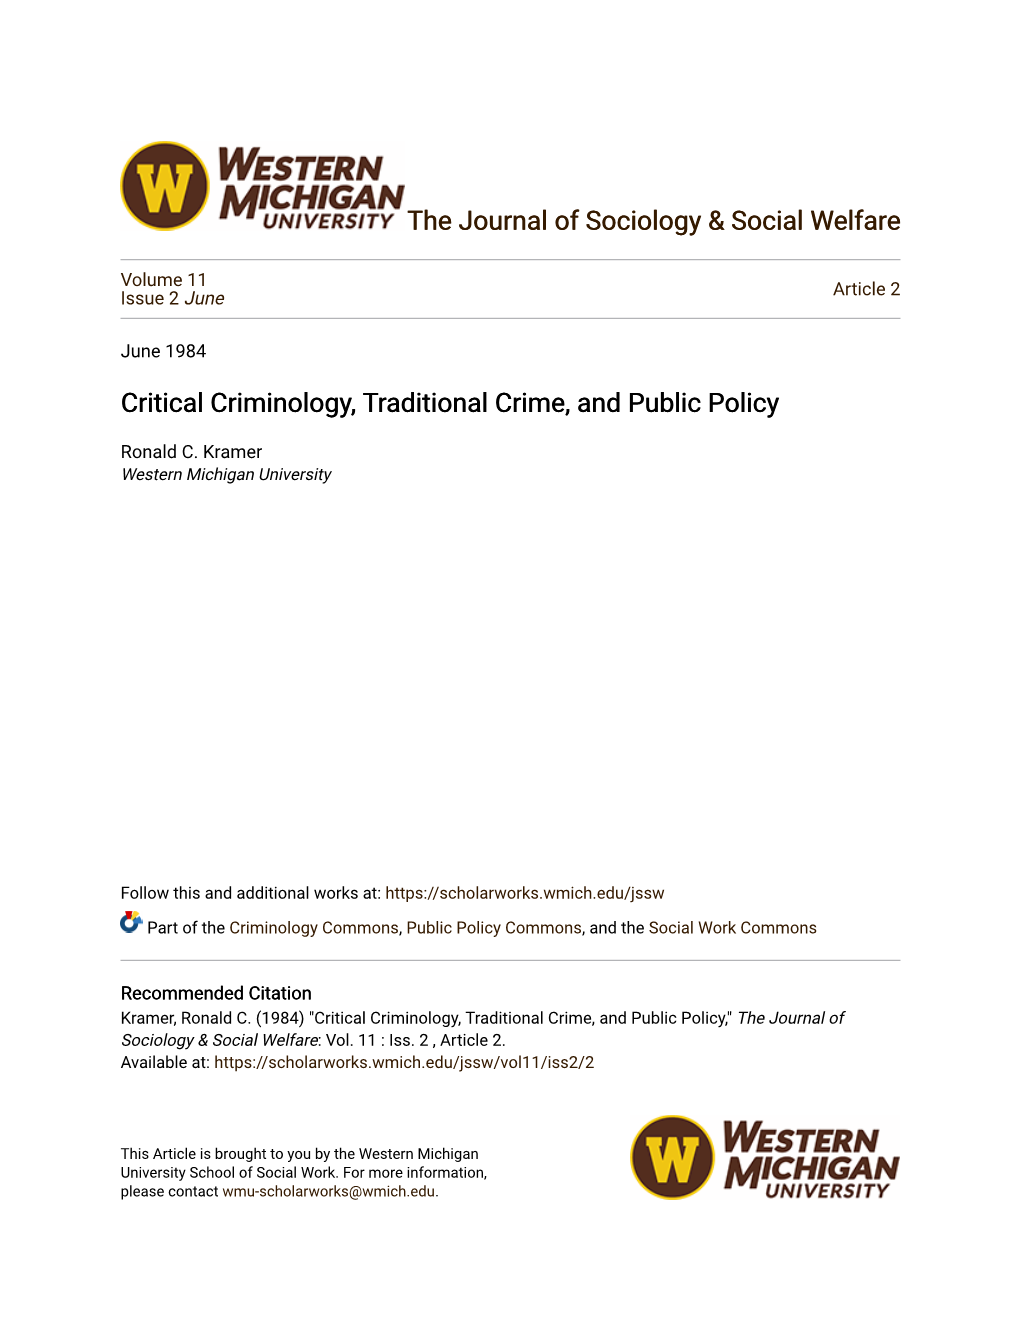 Critical Criminology, Traditional Crime, and Public Policy